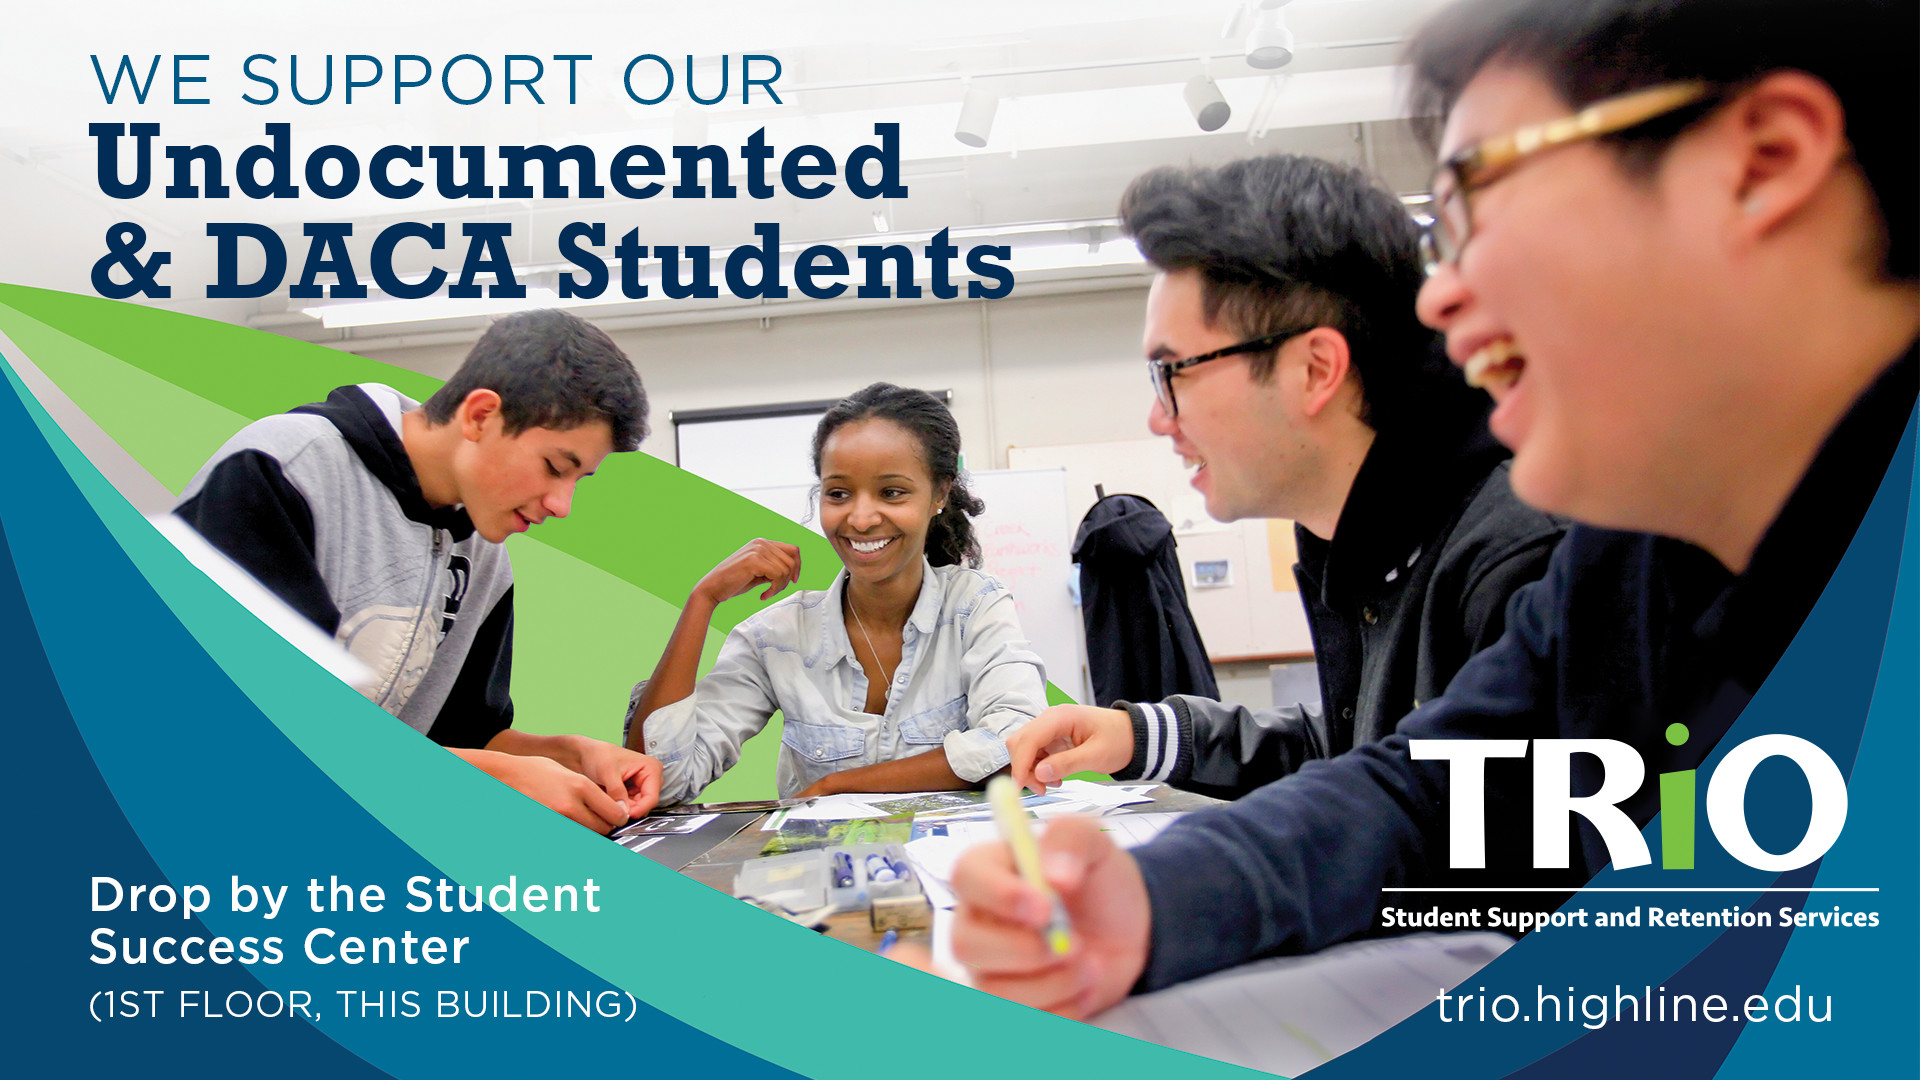 Image of four students studying and smiling at a table. Text reads: "We Support our Undocumented and DACA students. Drop by the Student Success Center (1st floor, this building). TRIO Student Support and Retention Services. trio.highline.edu